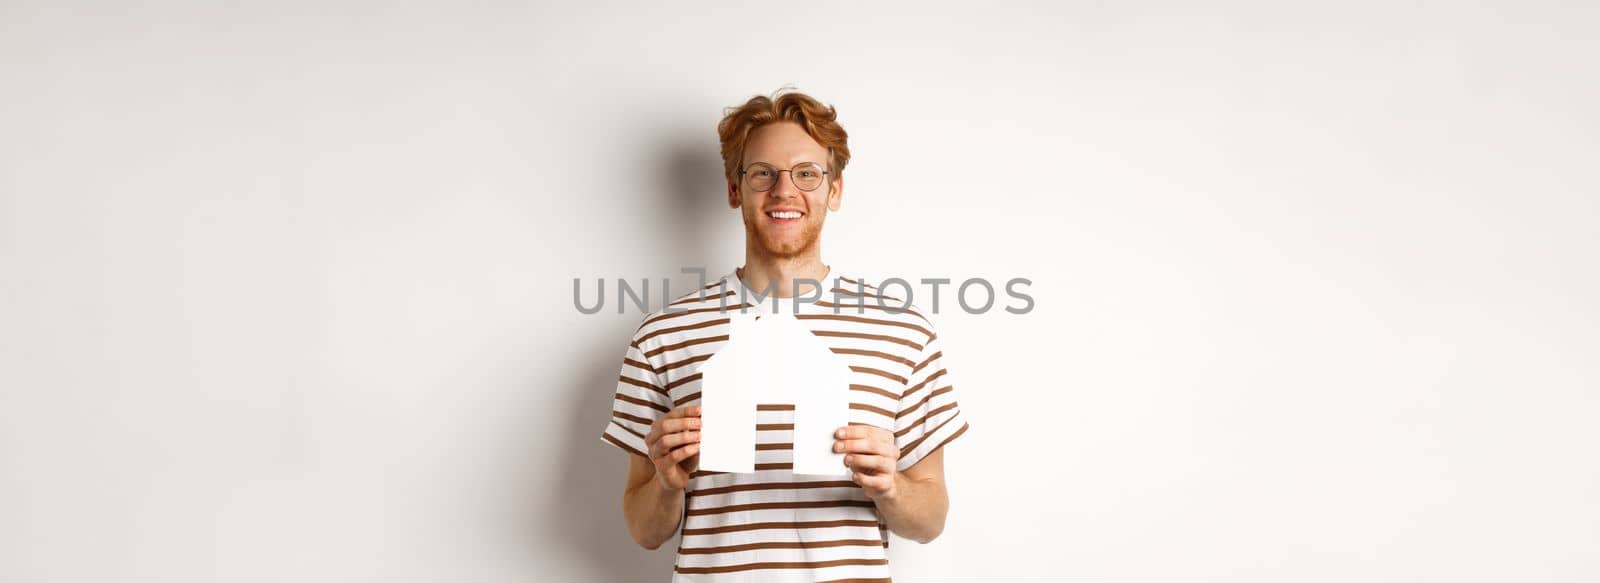 Handsome young man with beard and red hair, wearing glasses and striped t-shirt, showing paper house cutout and smiling, concept of real estate and buying property.